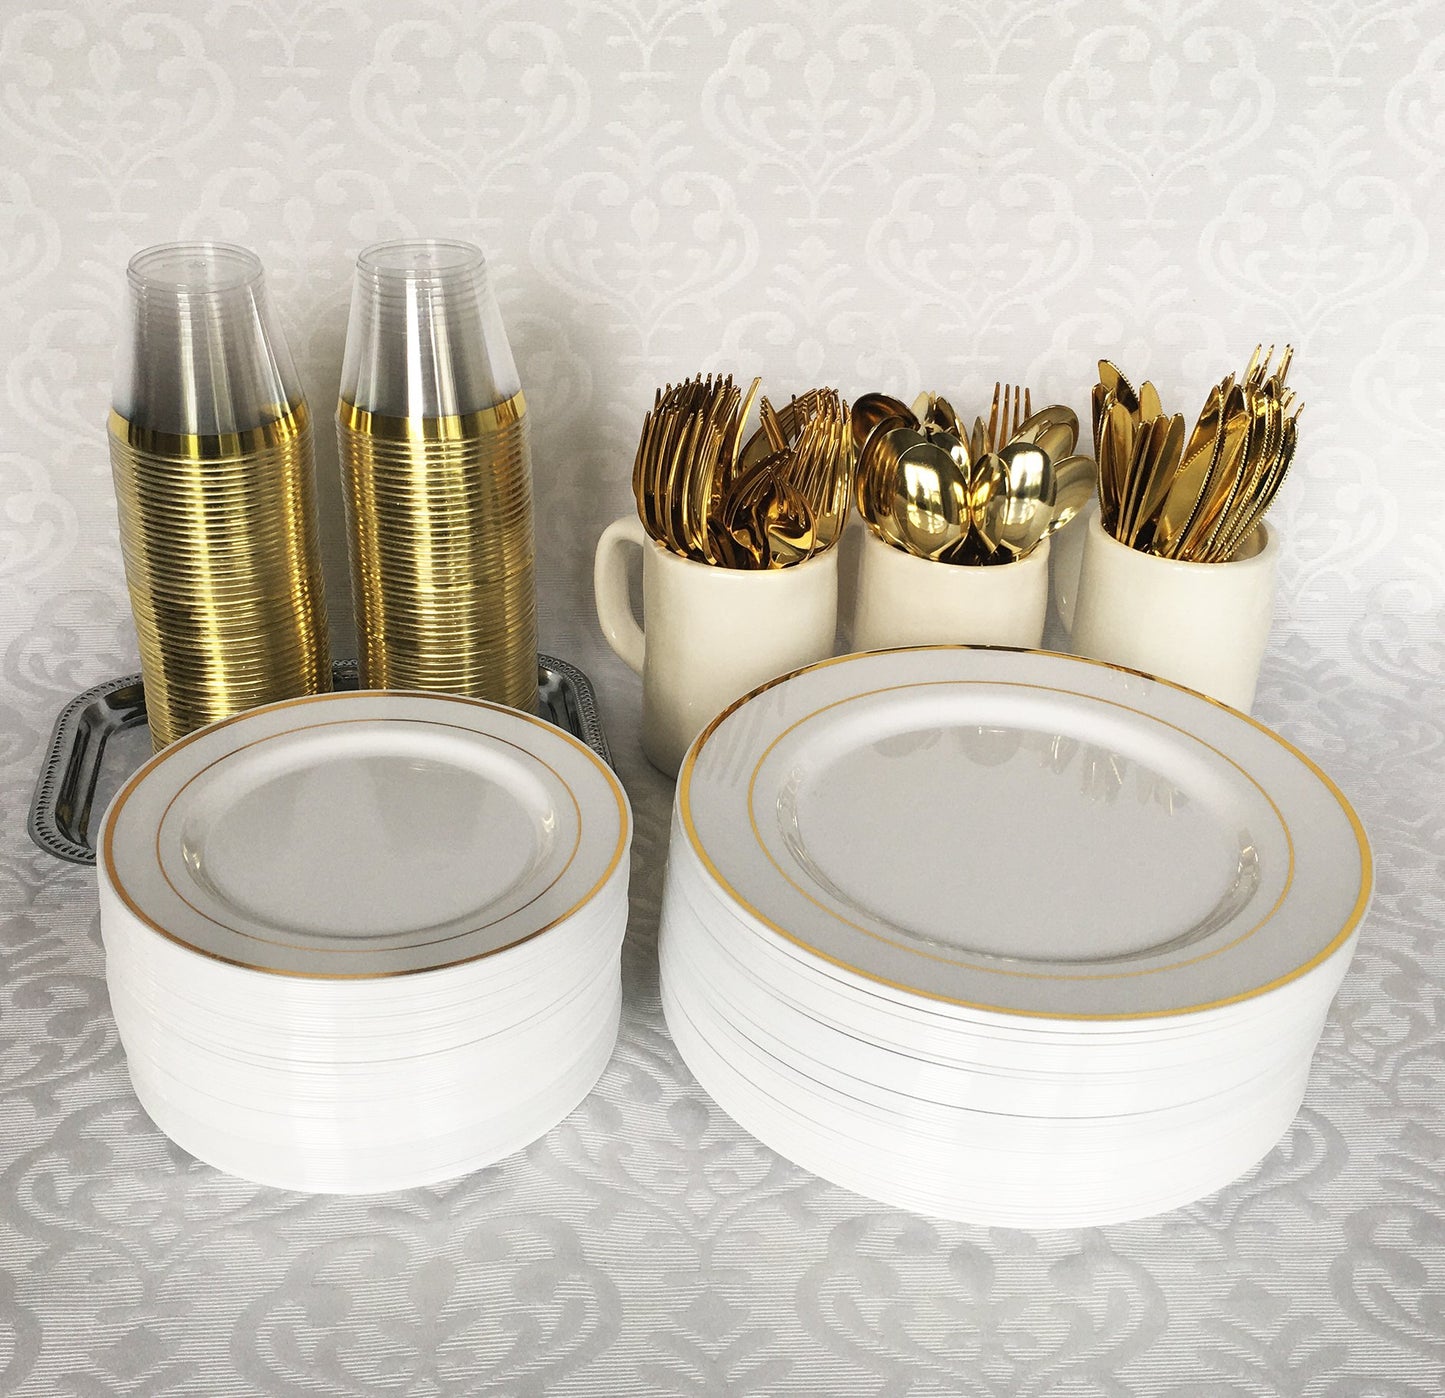 JL Prime 50 Piece Gold Plastic Plates for 25 Guests, Heavy Duty Reusable Disposable Plastic Plates with Gold Rim for Party and Wedding with 25 Dinner Plates & 25 Salad Plates